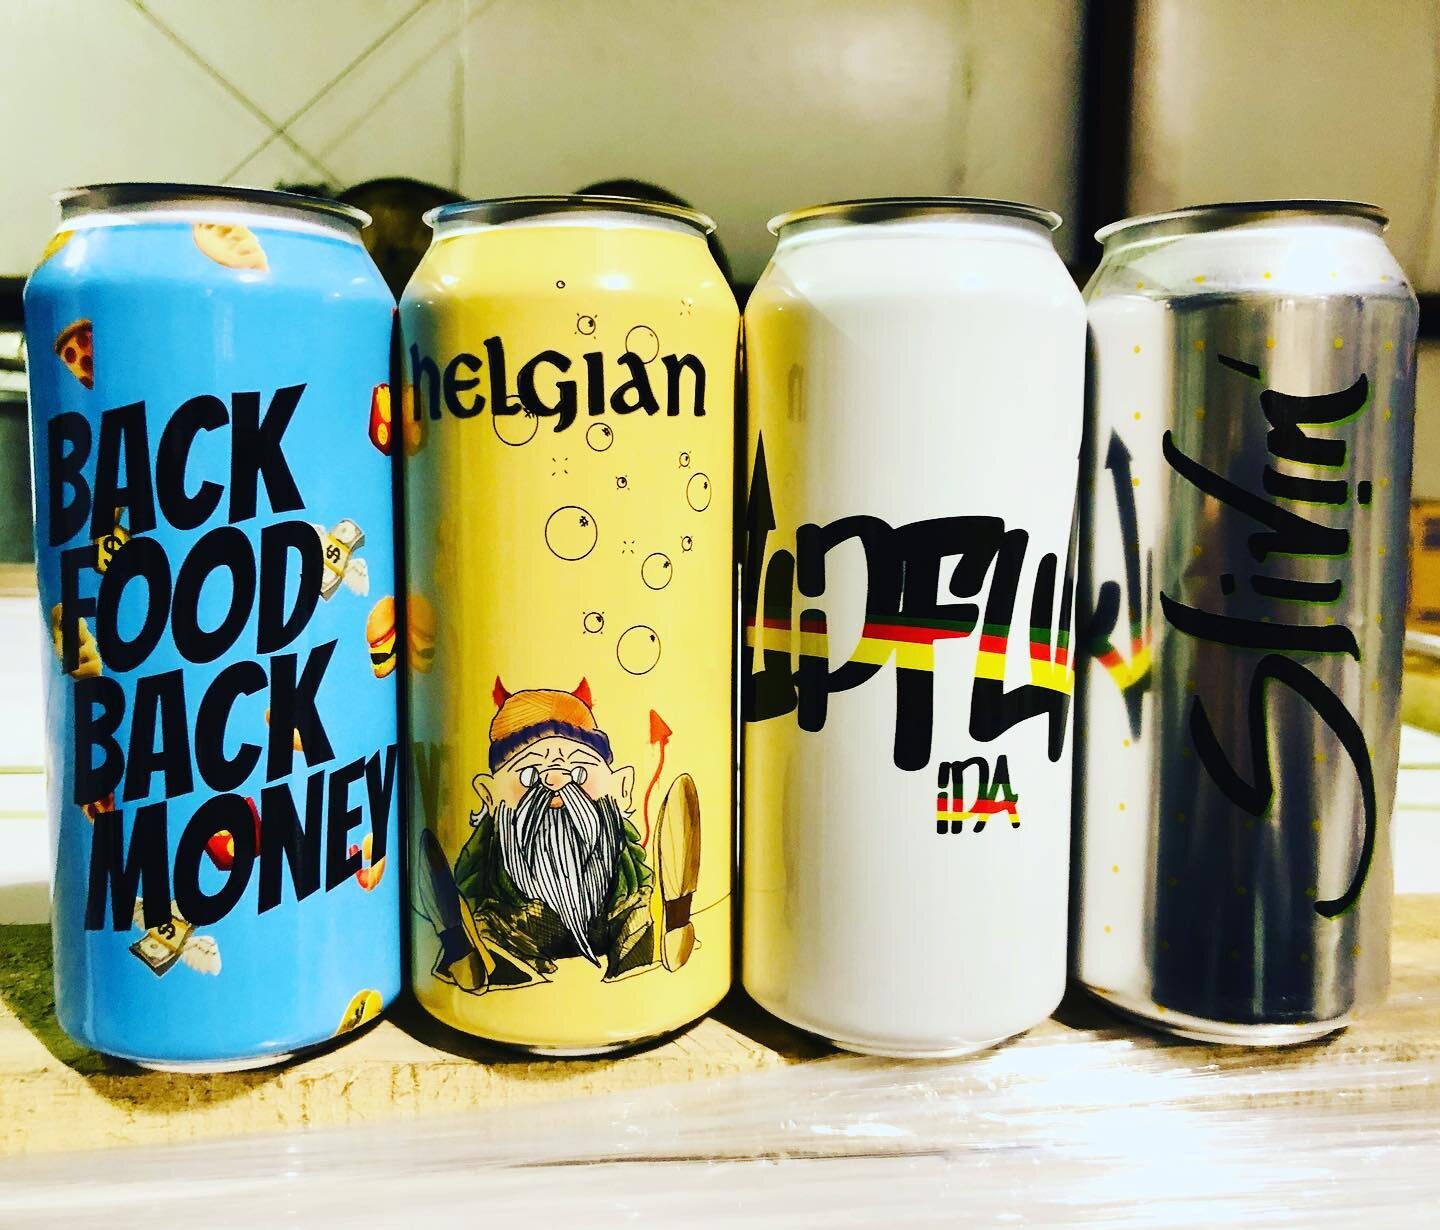 A few new (soon to be filled) cans just came in today. Coming soon to a essential operation near you. Stay safe people. ✌️❤️🍻